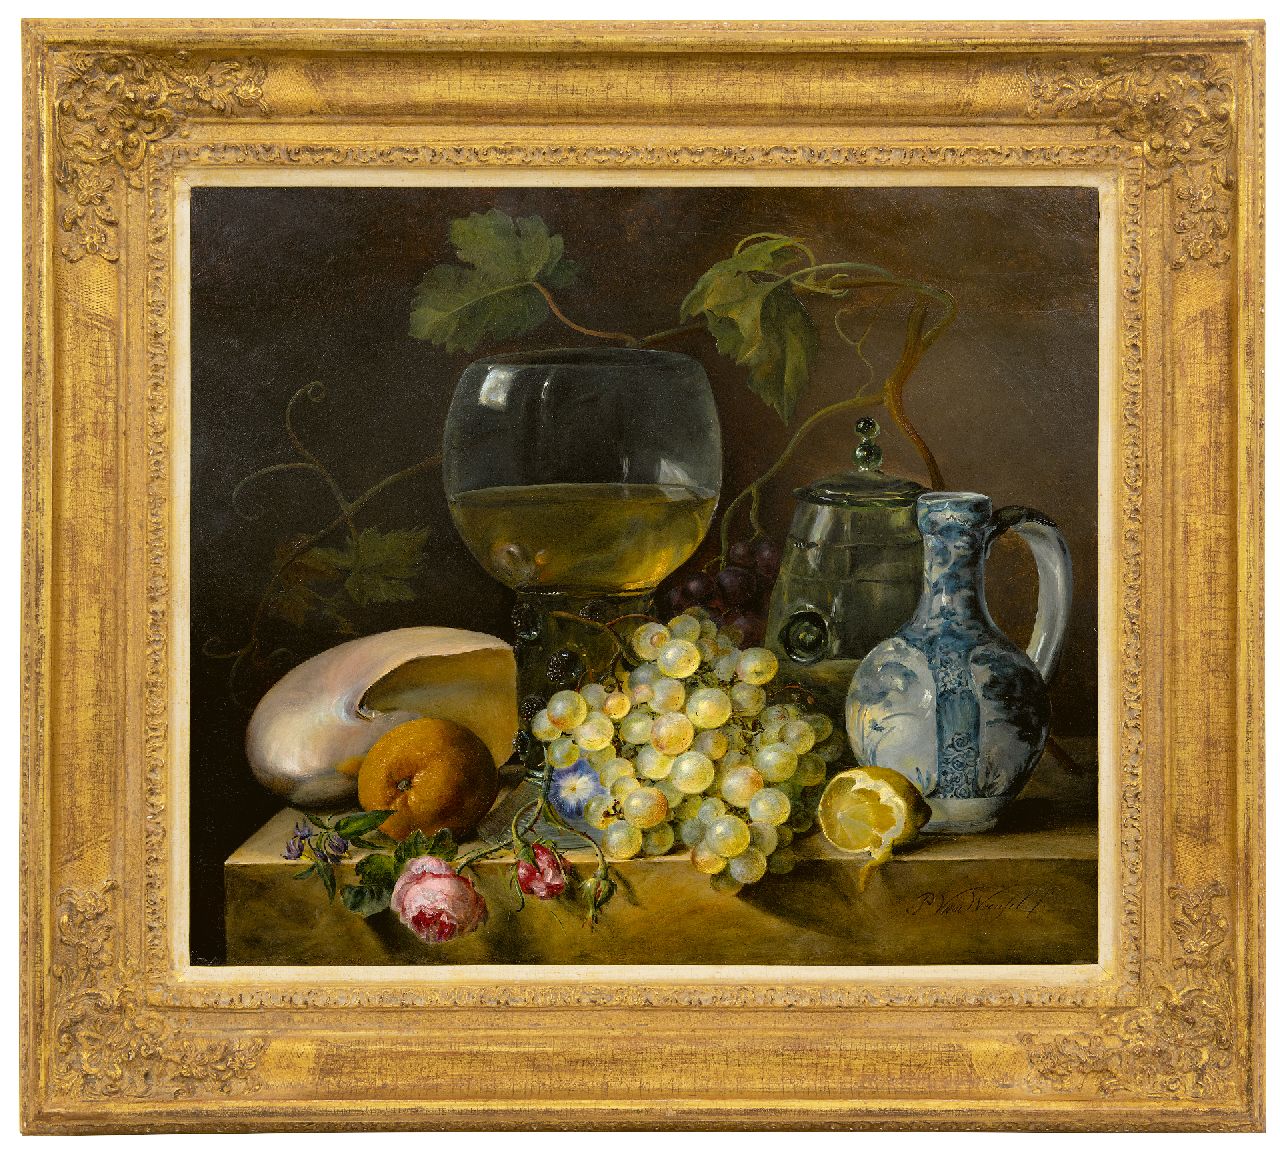 Woensel P. van | Petronella van Woensel, A still life of a rummer, exotic shell and grapes, oil on panel 50.8 x 58.9 cm, signed l.r.